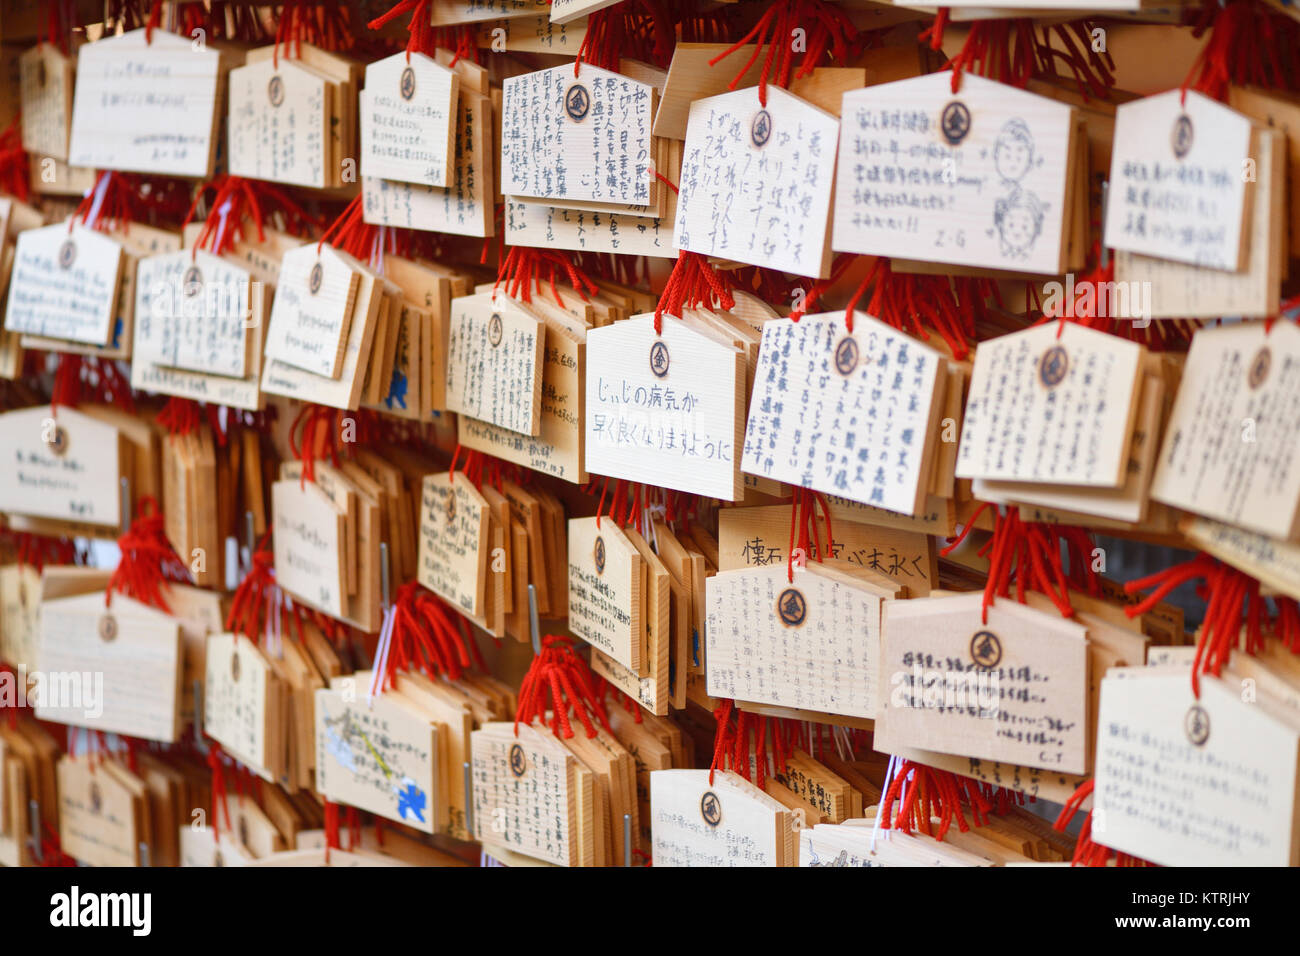 Ema, Japanese wooden wishing plaques with prayers and wishes written on them, hanging at a Shinto shrine in Kyoto, Japan. Stock Photo